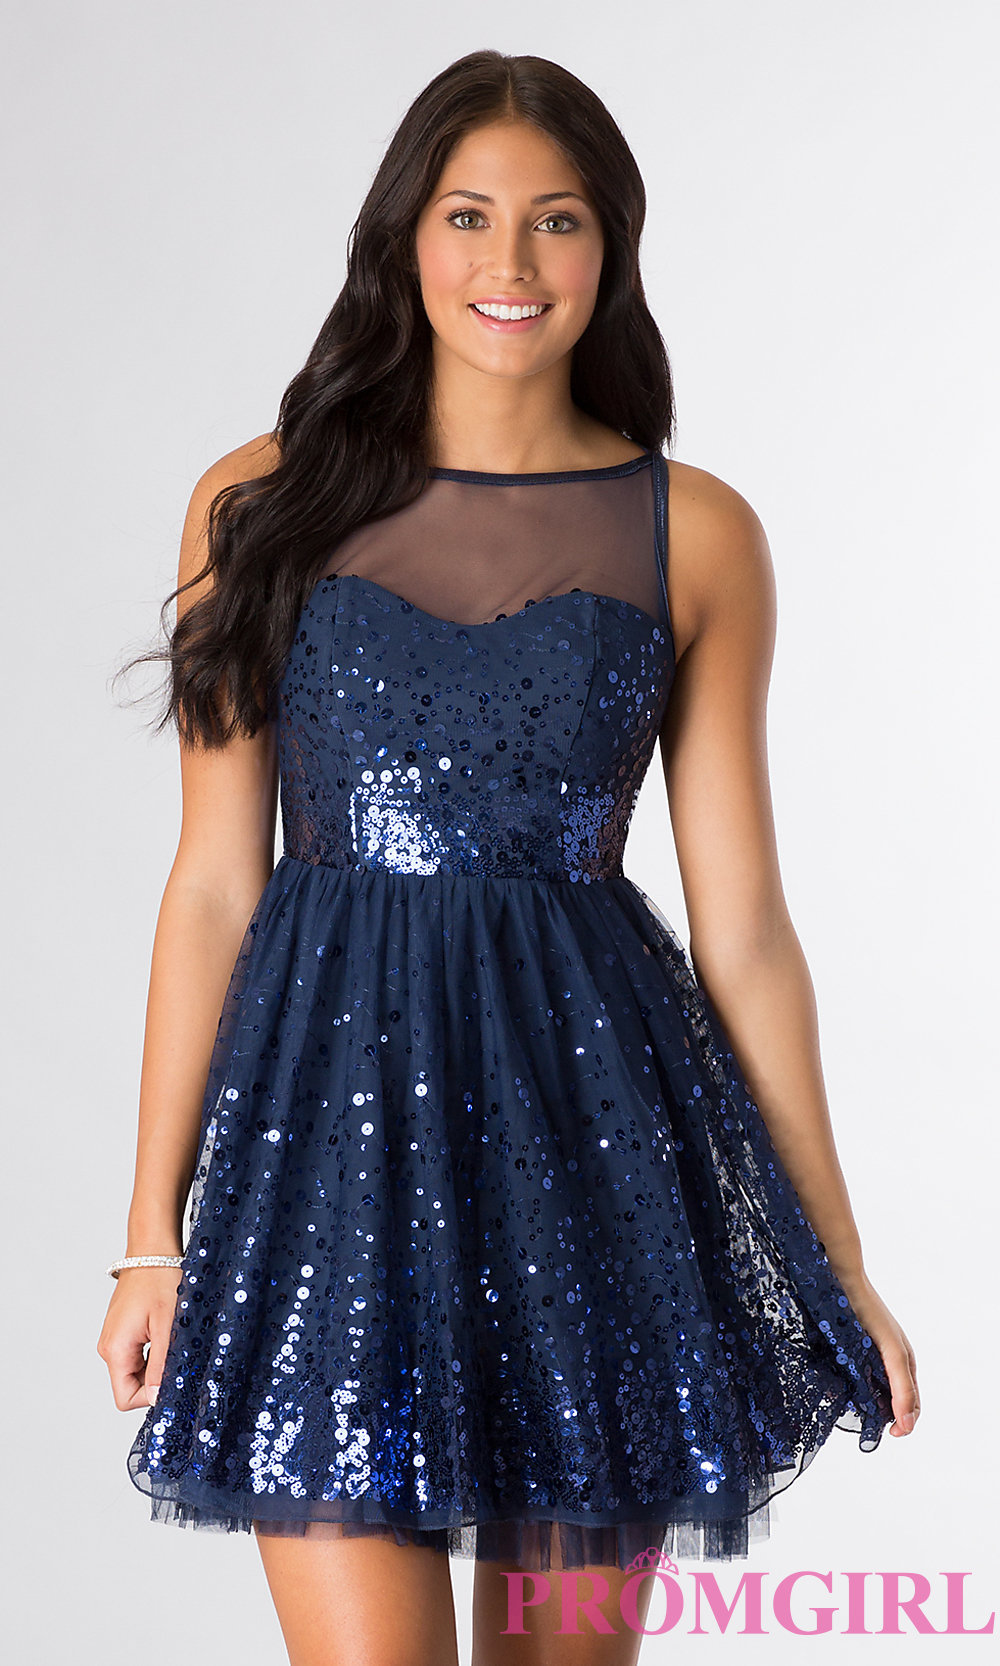 Blue Dress With Sequins & Clothes Review